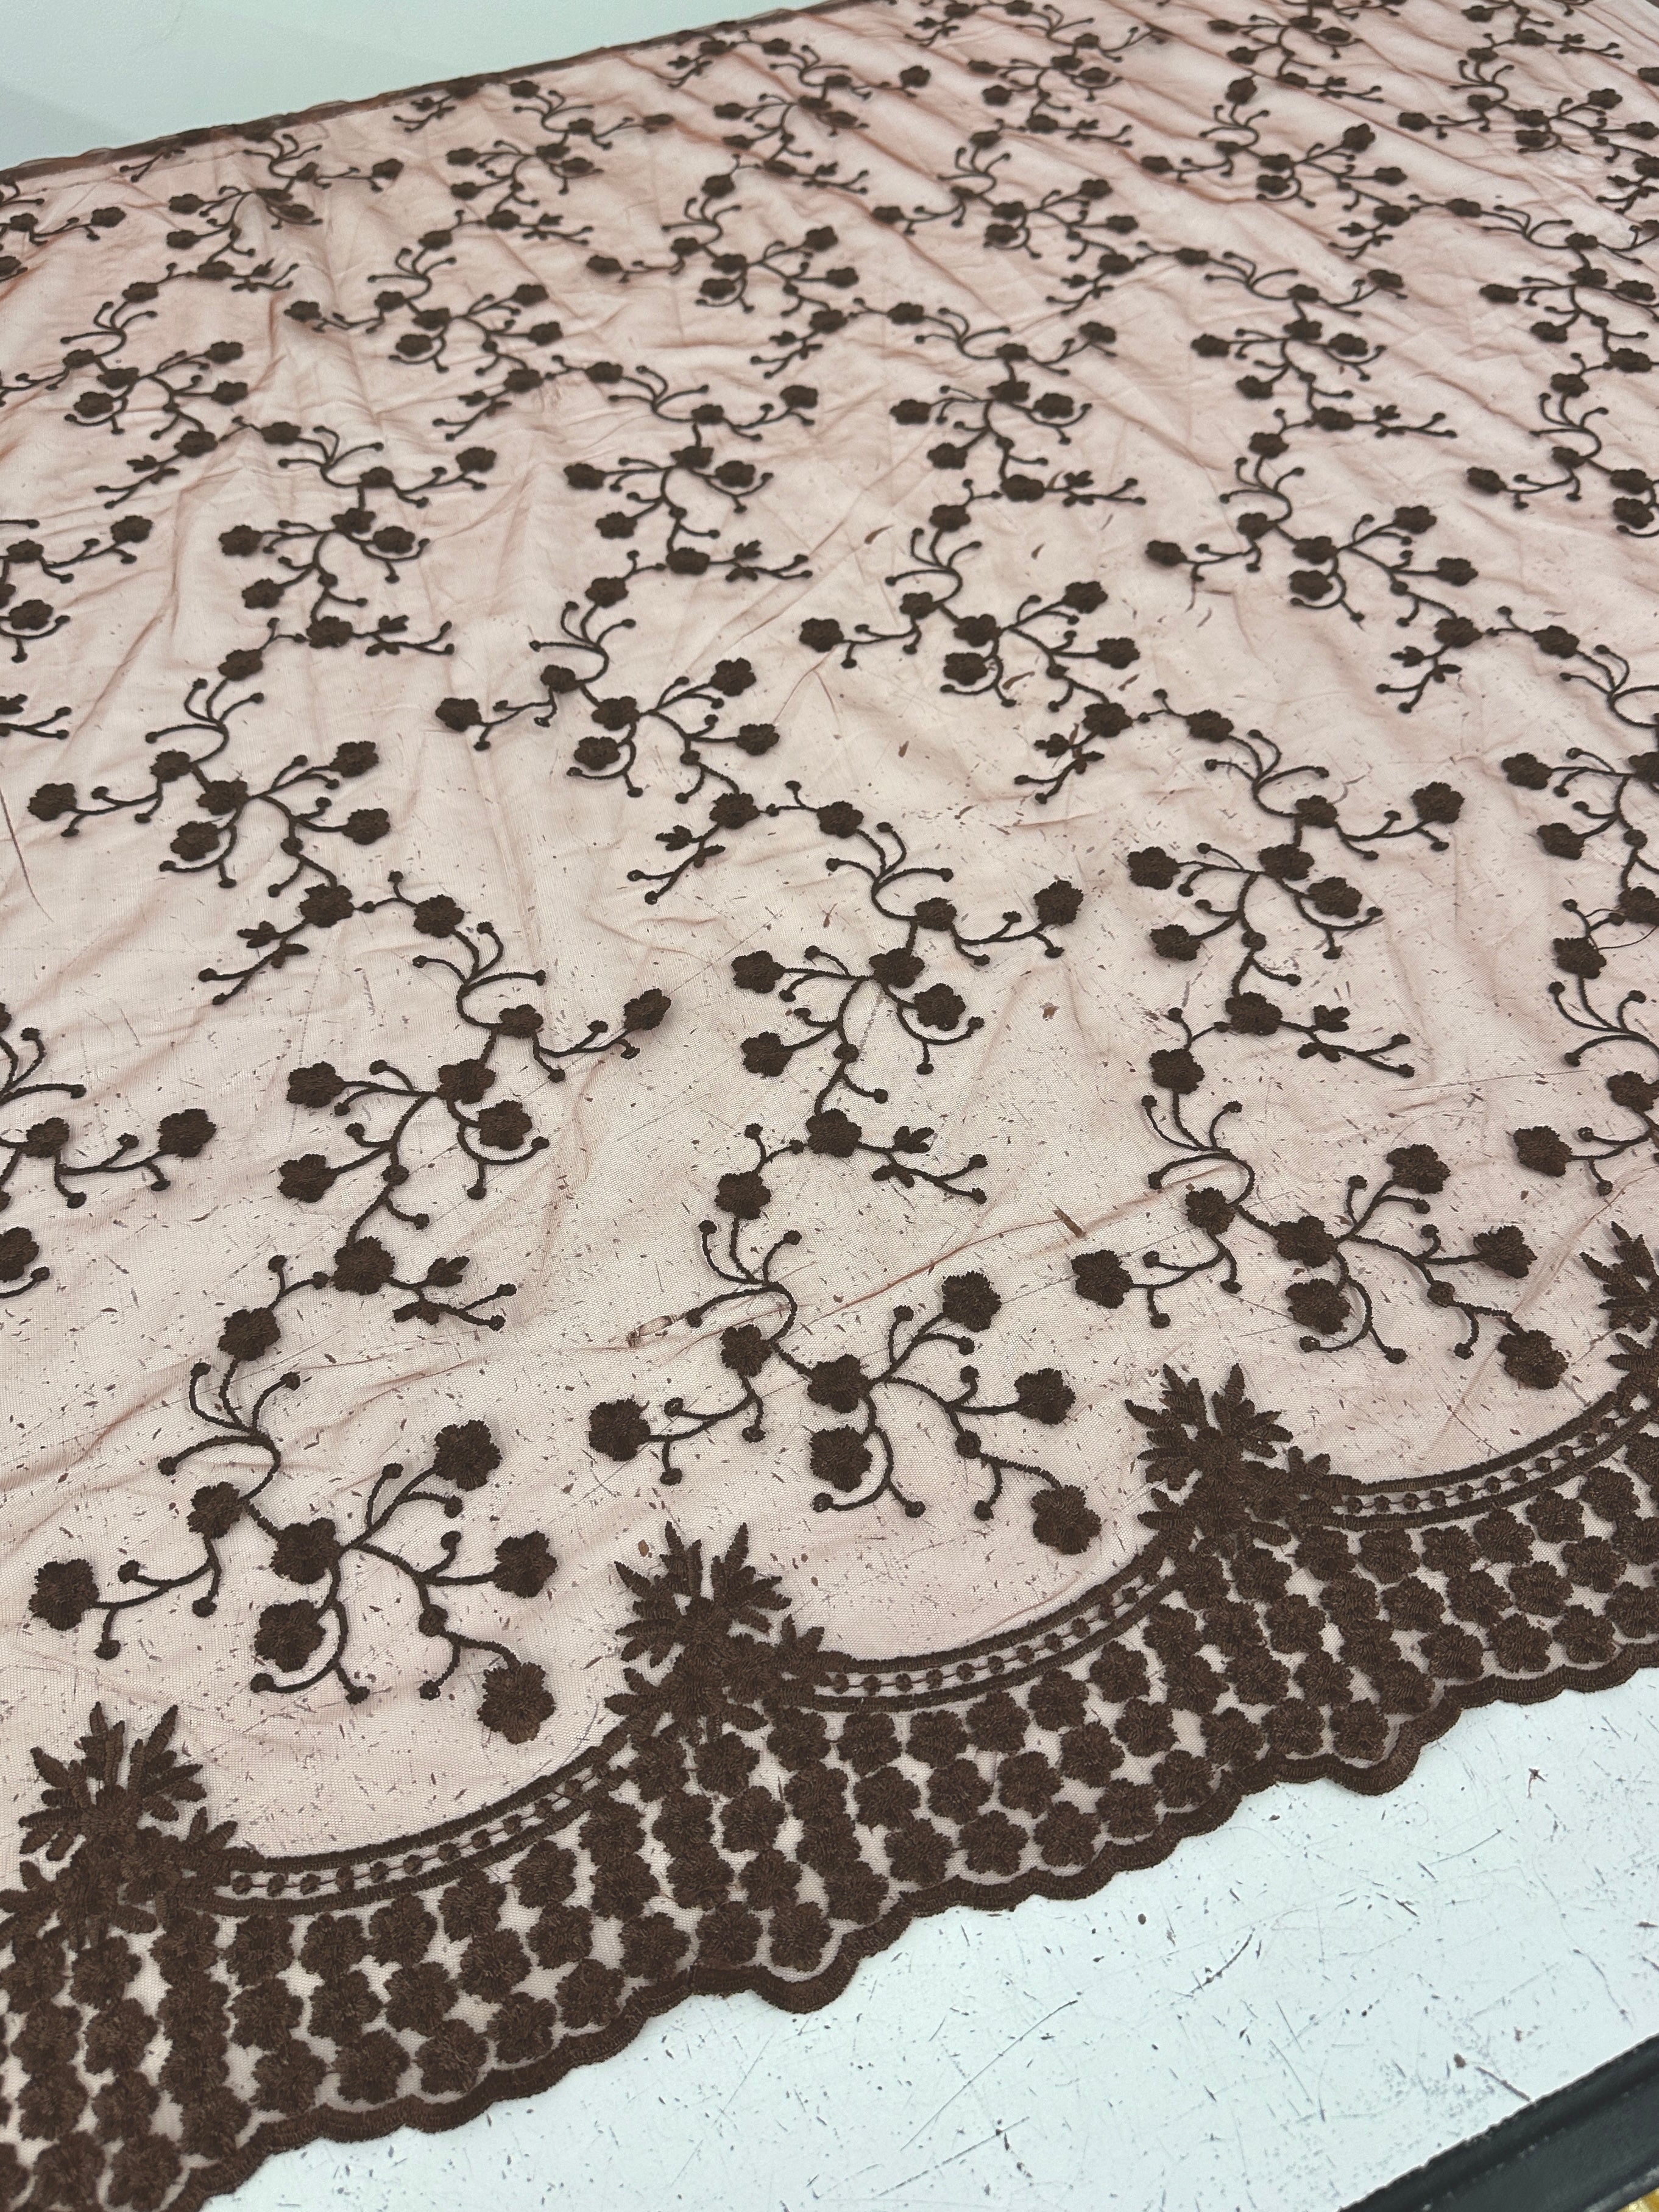 brown Scalloped Embroidery floral Lace, dark brown Scallop Embroidery floral Lace, light brown Scallop Embroidery Lace, Scalloped Embroidery floral Lace for woman, Scalloped Embroidery floral Lace for bride, Scalloped Embroidery floralLace for gown, Scallop Embroidery Lace in low price, premium Scallop Embroidery Lace, cheap Scallop Embroidery Lace